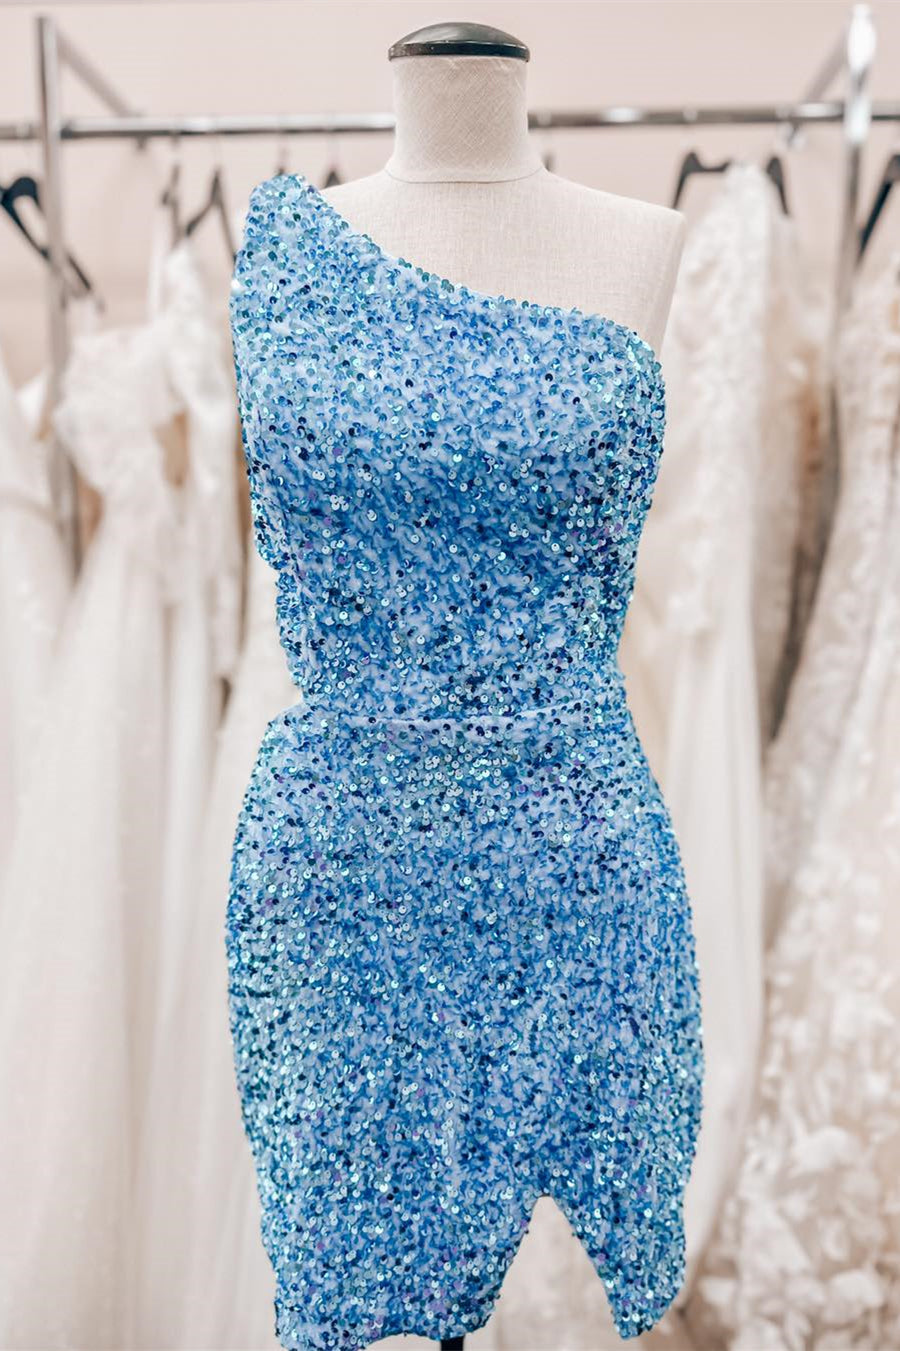 Formal Dresses Outfit, Sky Blue One Shoulder Sequins Sheath Cut-Out Homecoming Dress